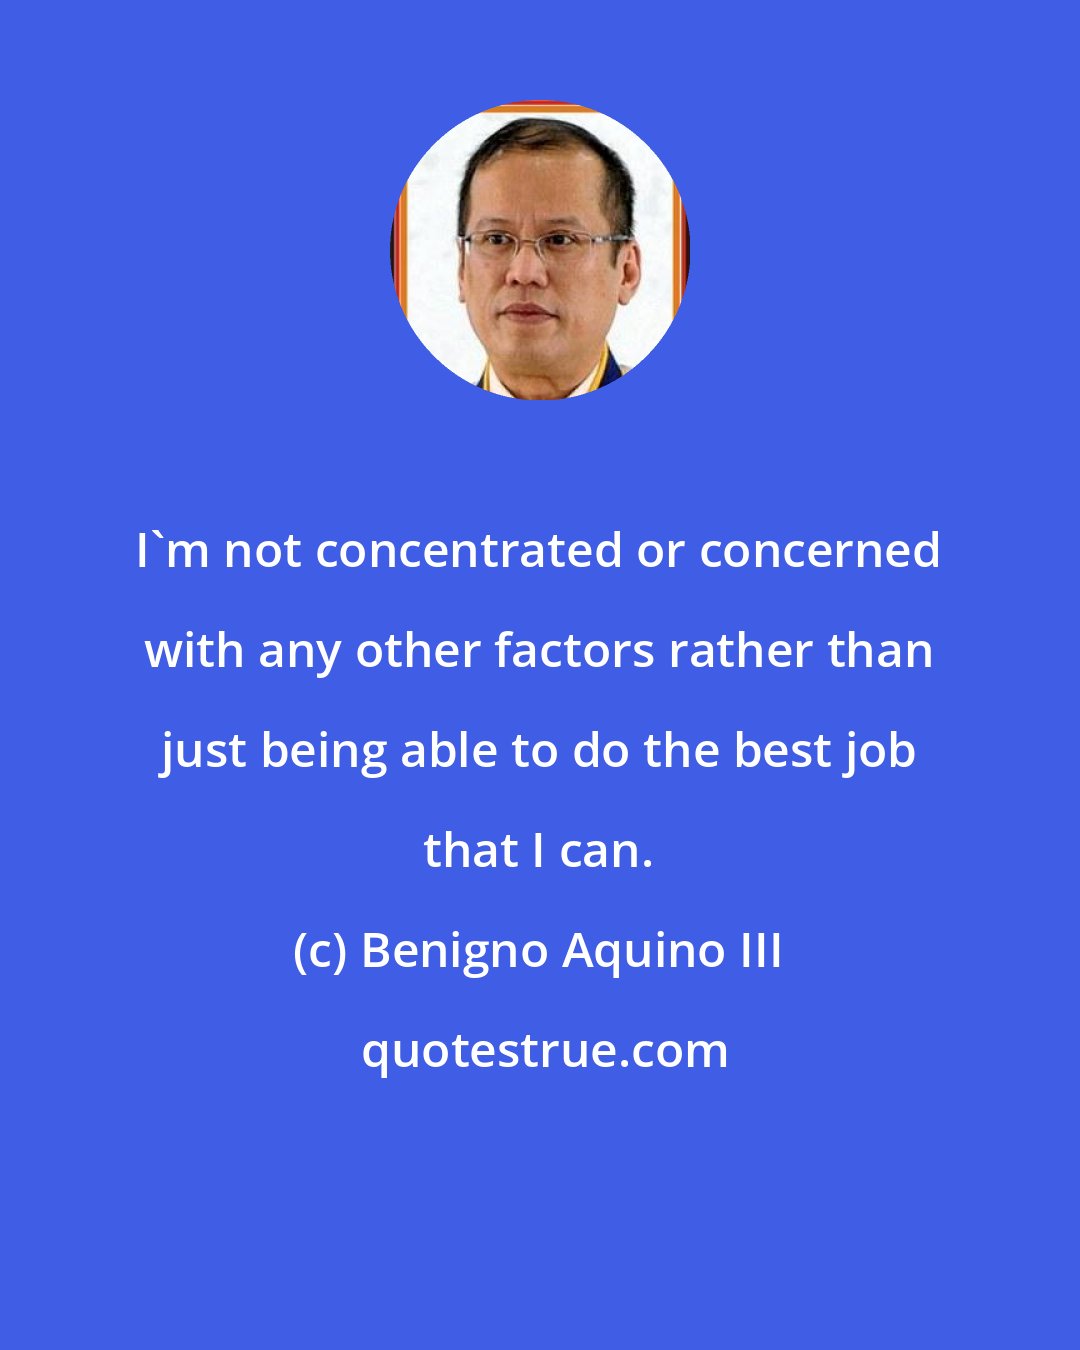 Benigno Aquino III: I'm not concentrated or concerned with any other factors rather than just being able to do the best job that I can.